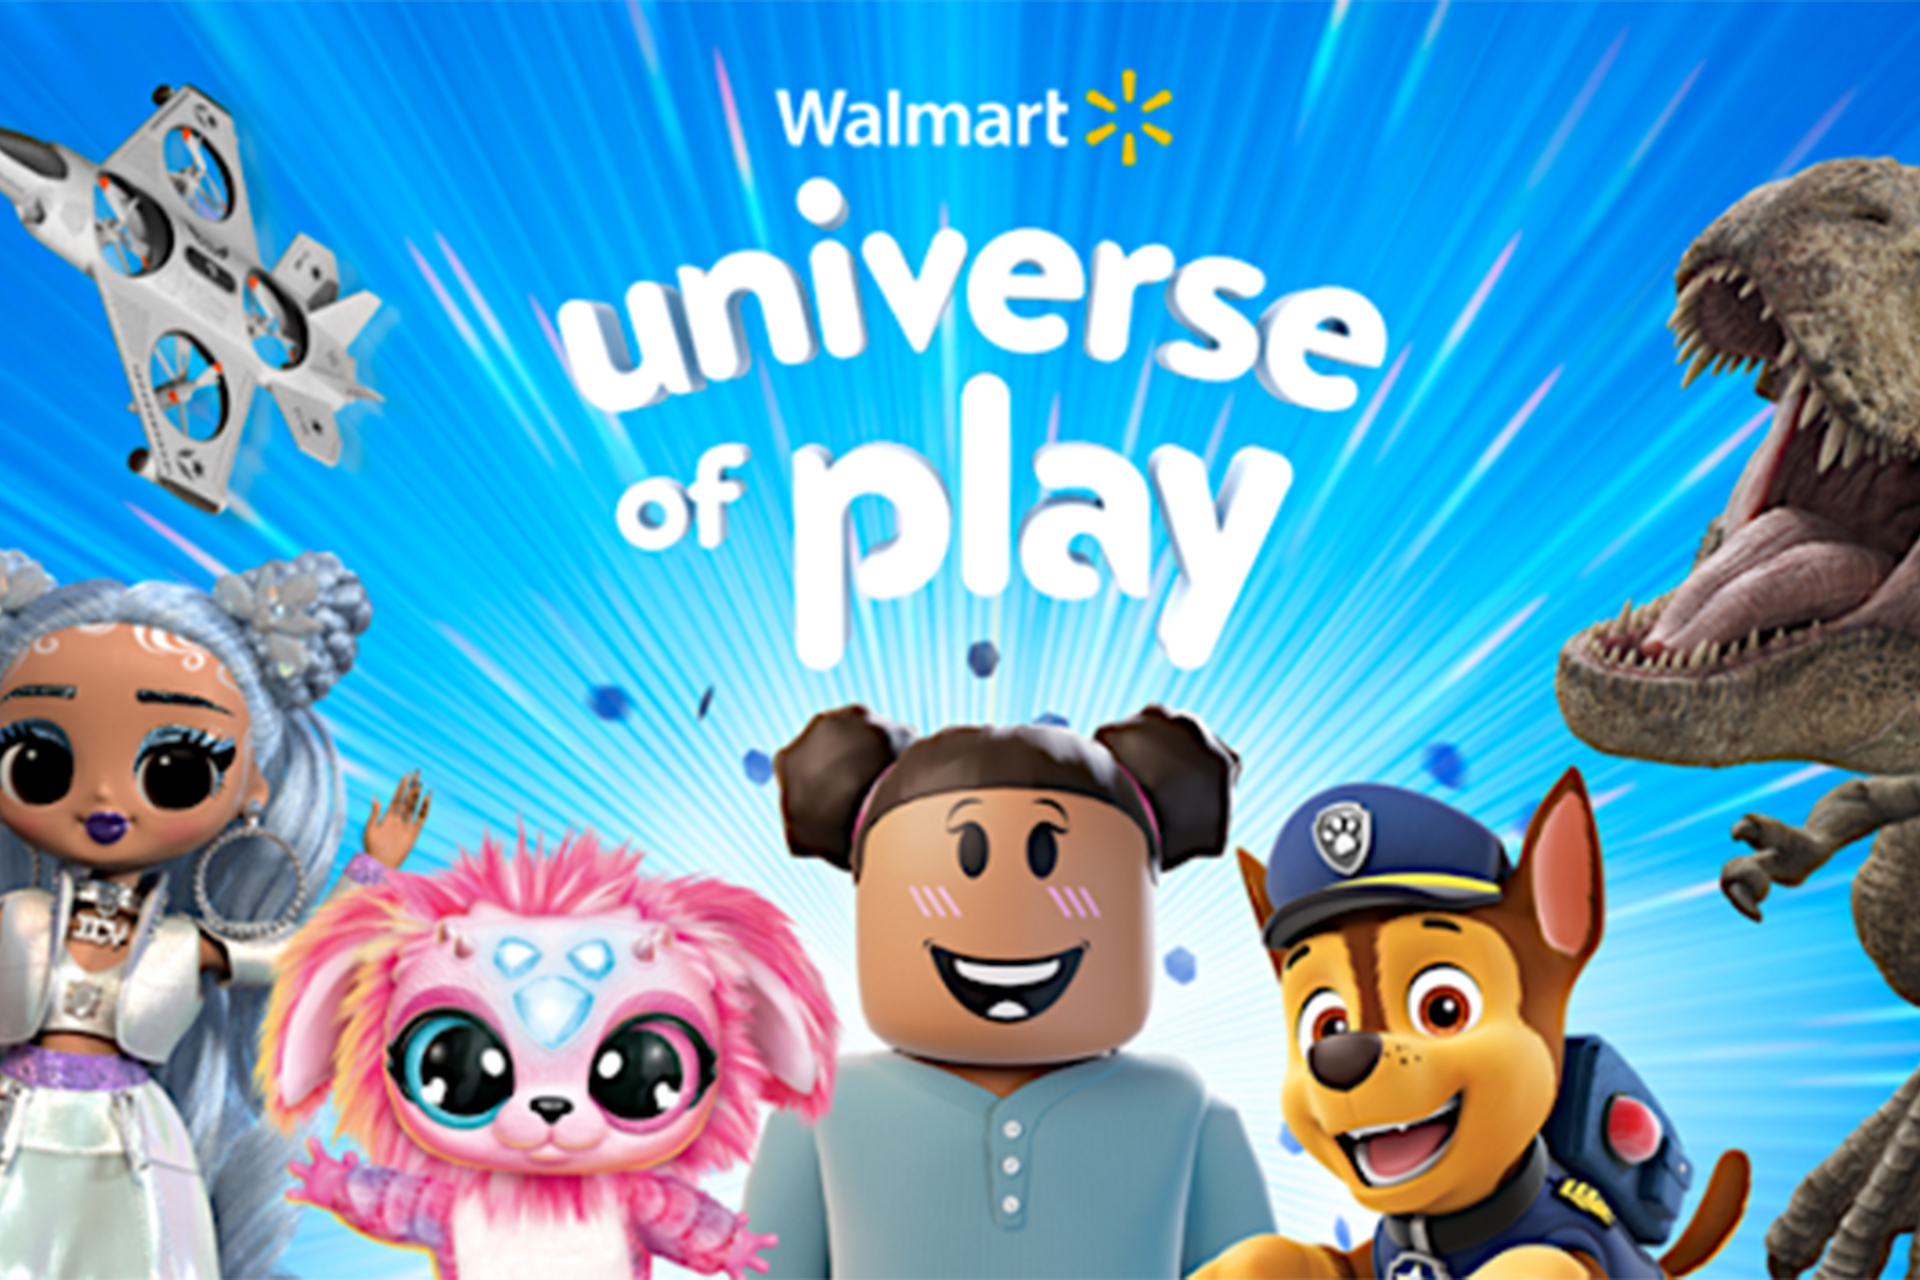 Walmart releases two metaverse experiences in Roblox